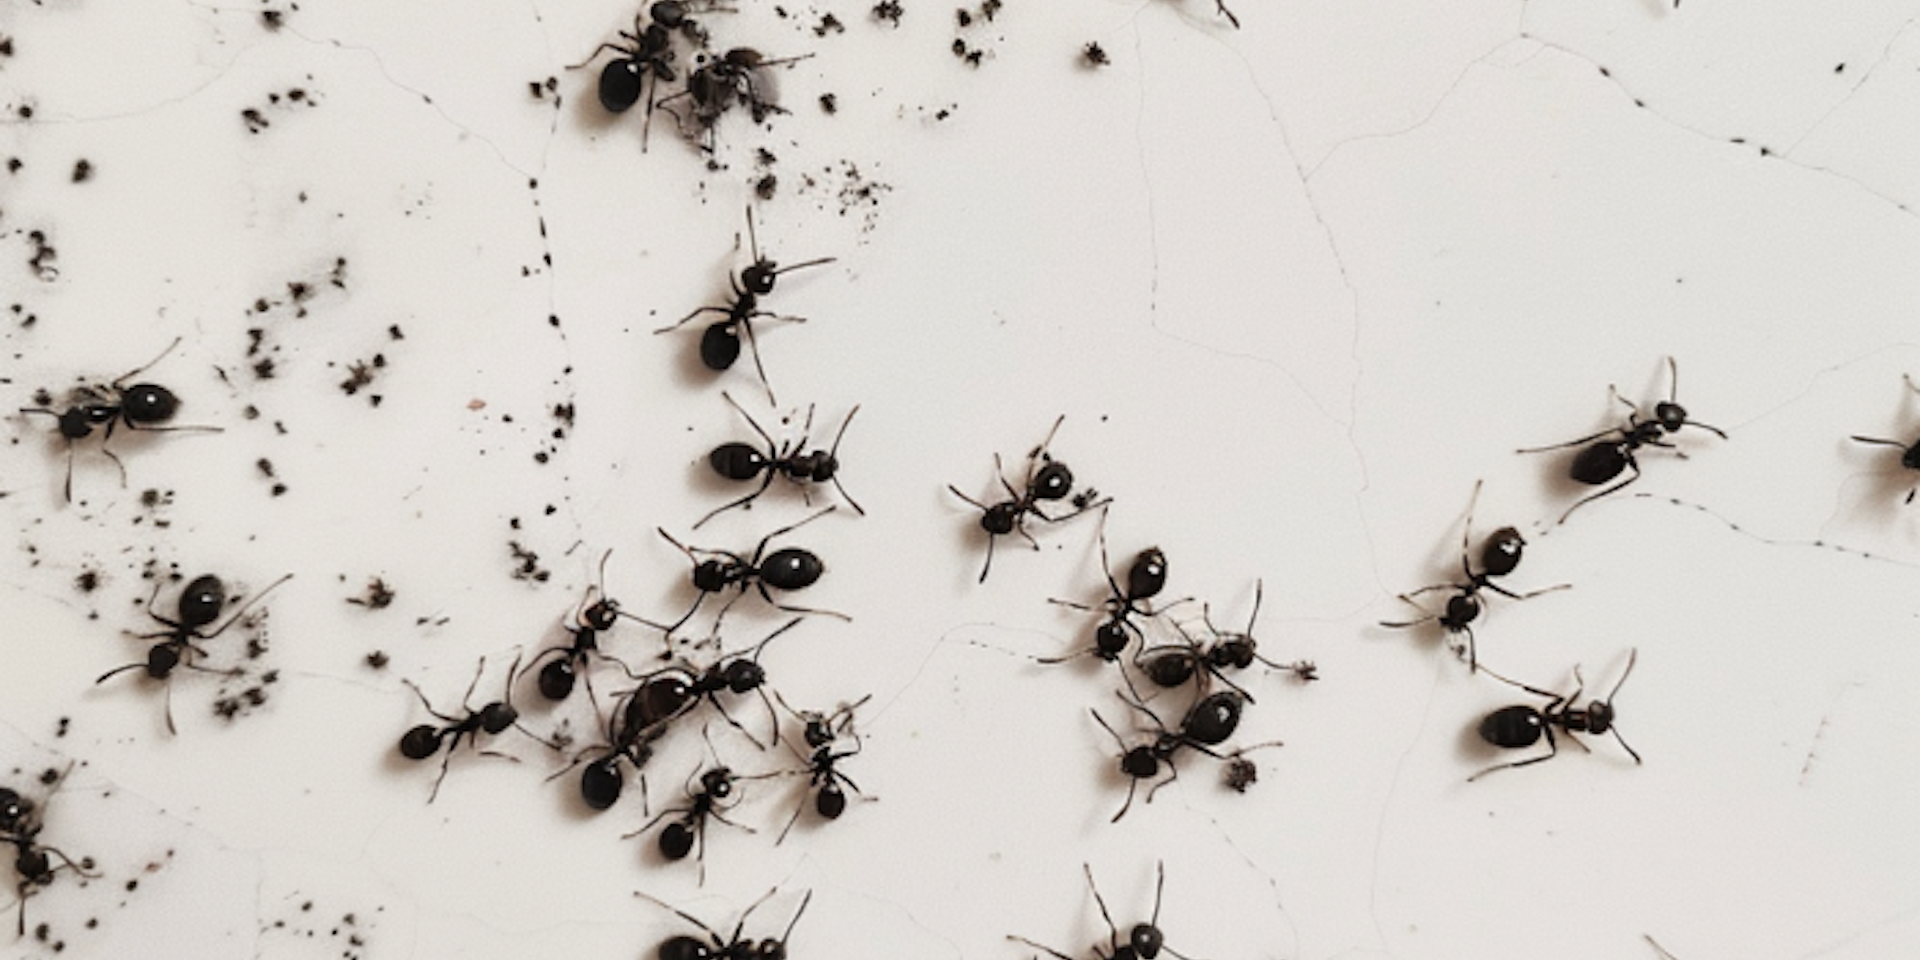 tiny black ant infestation can definitely be bothersome